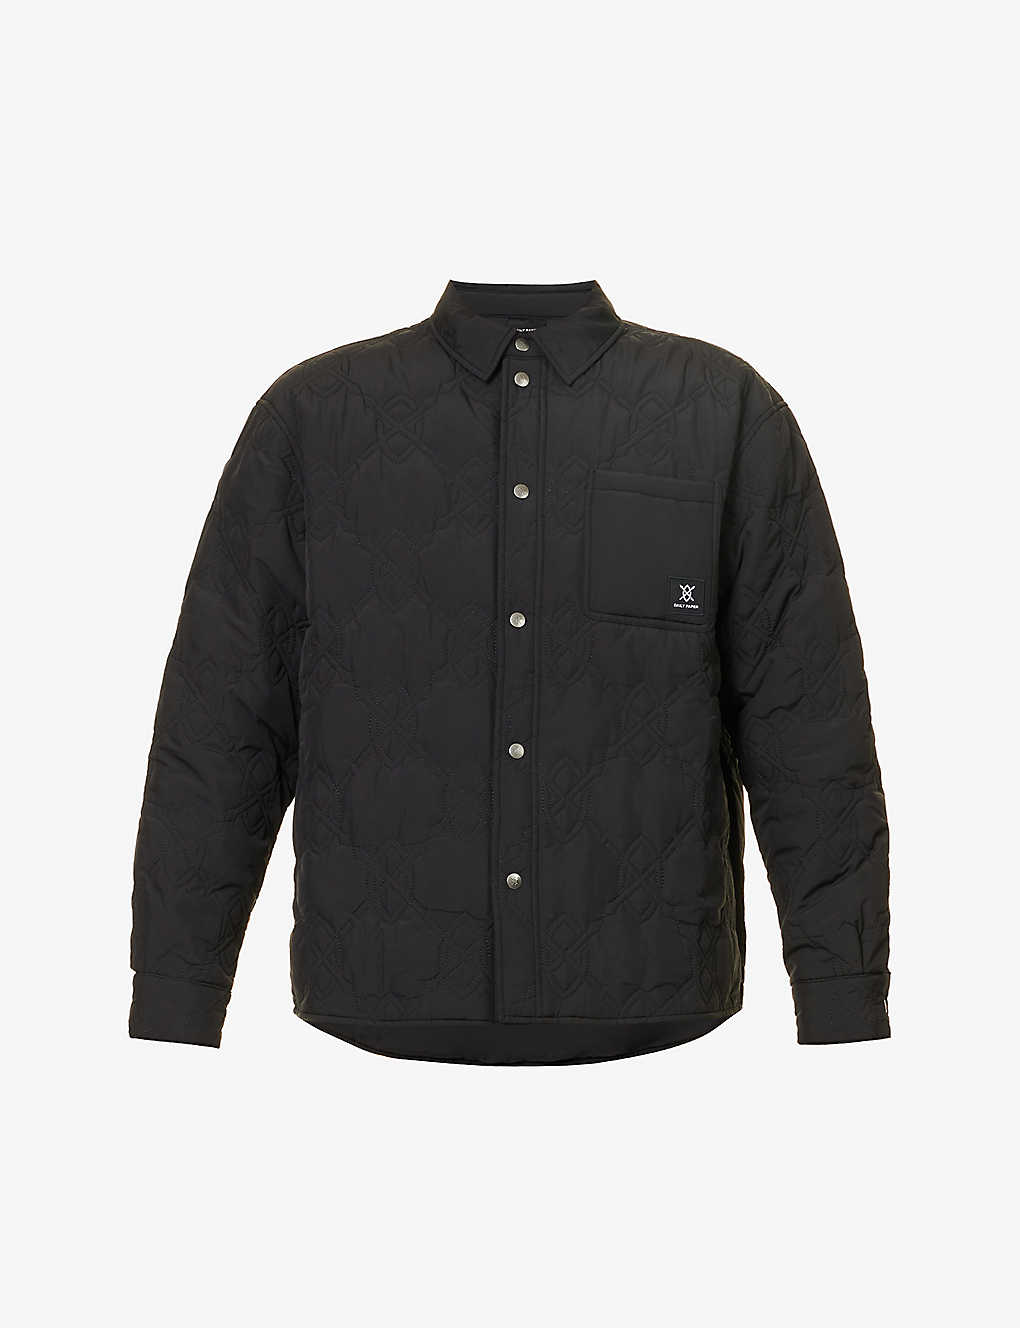 DAILY PAPER DAILY PAPER MEN'S BLACK RAJUB QUILTED WOVEN SHIRT